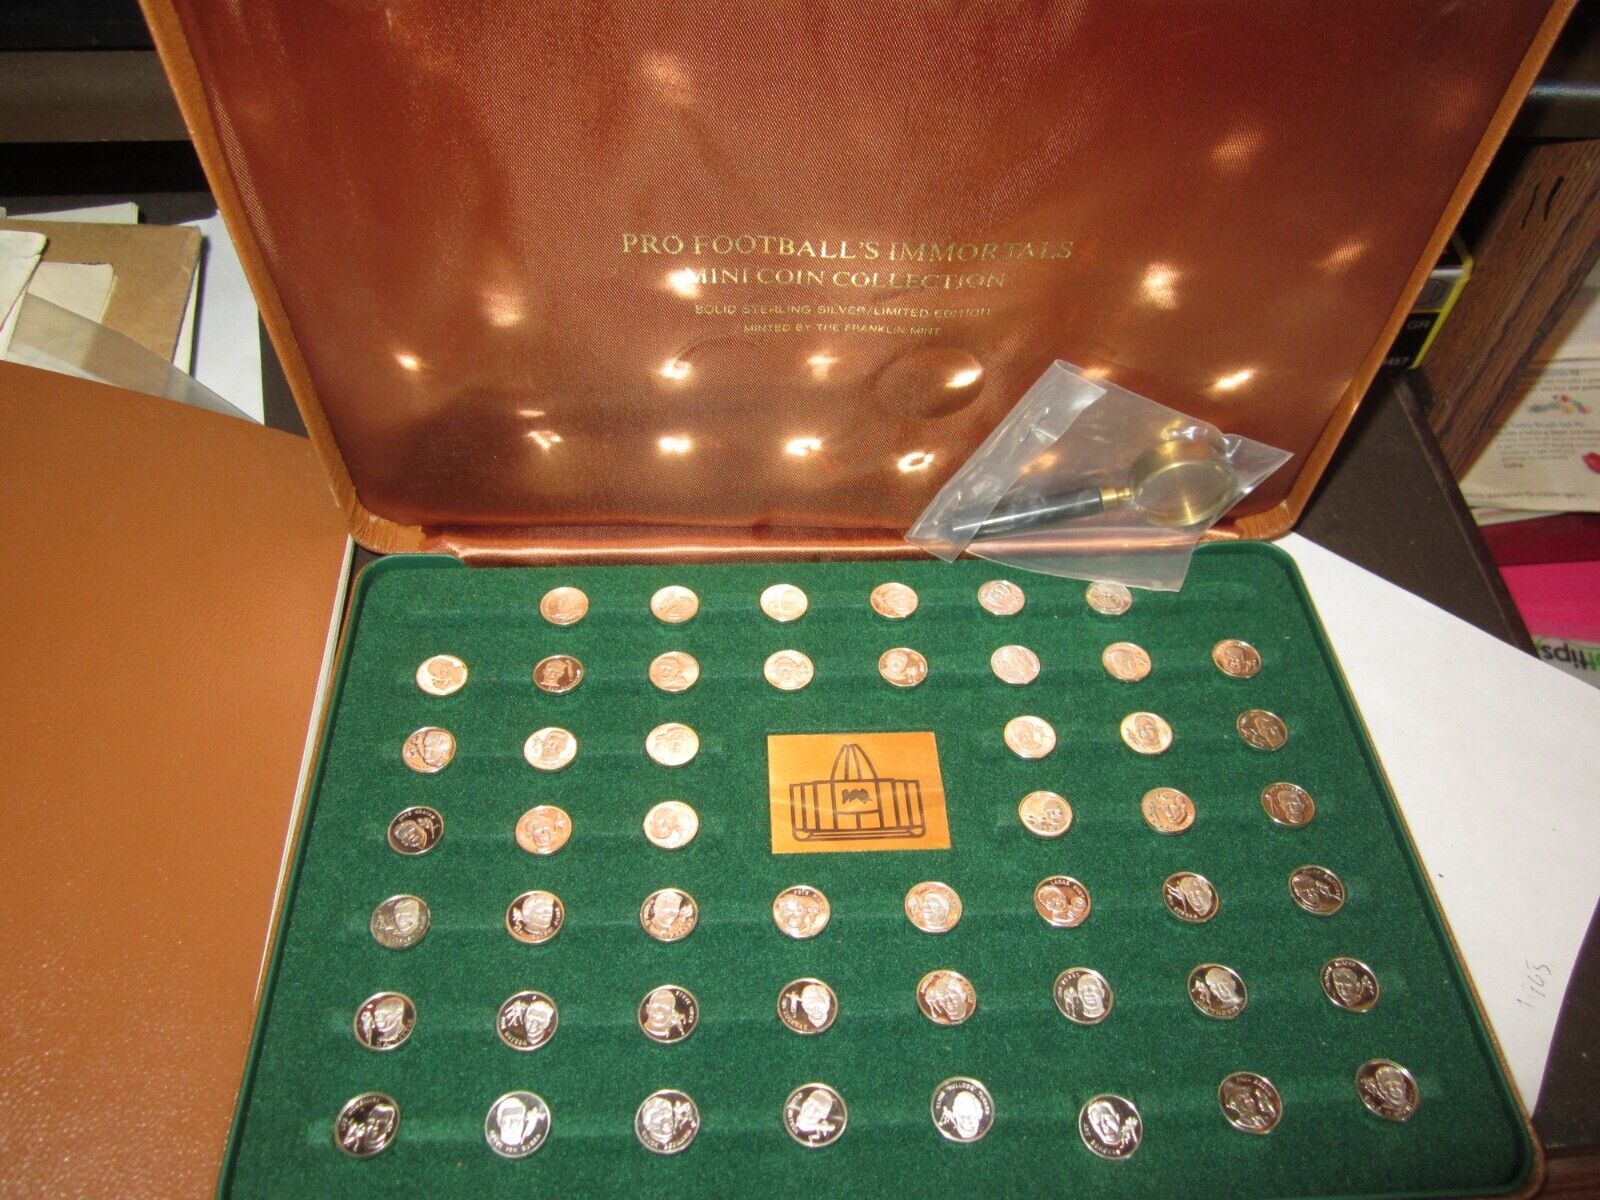 1973 Franklin Mint Pro Football Hall of Fame Immortals Sterling Silver Coin Set